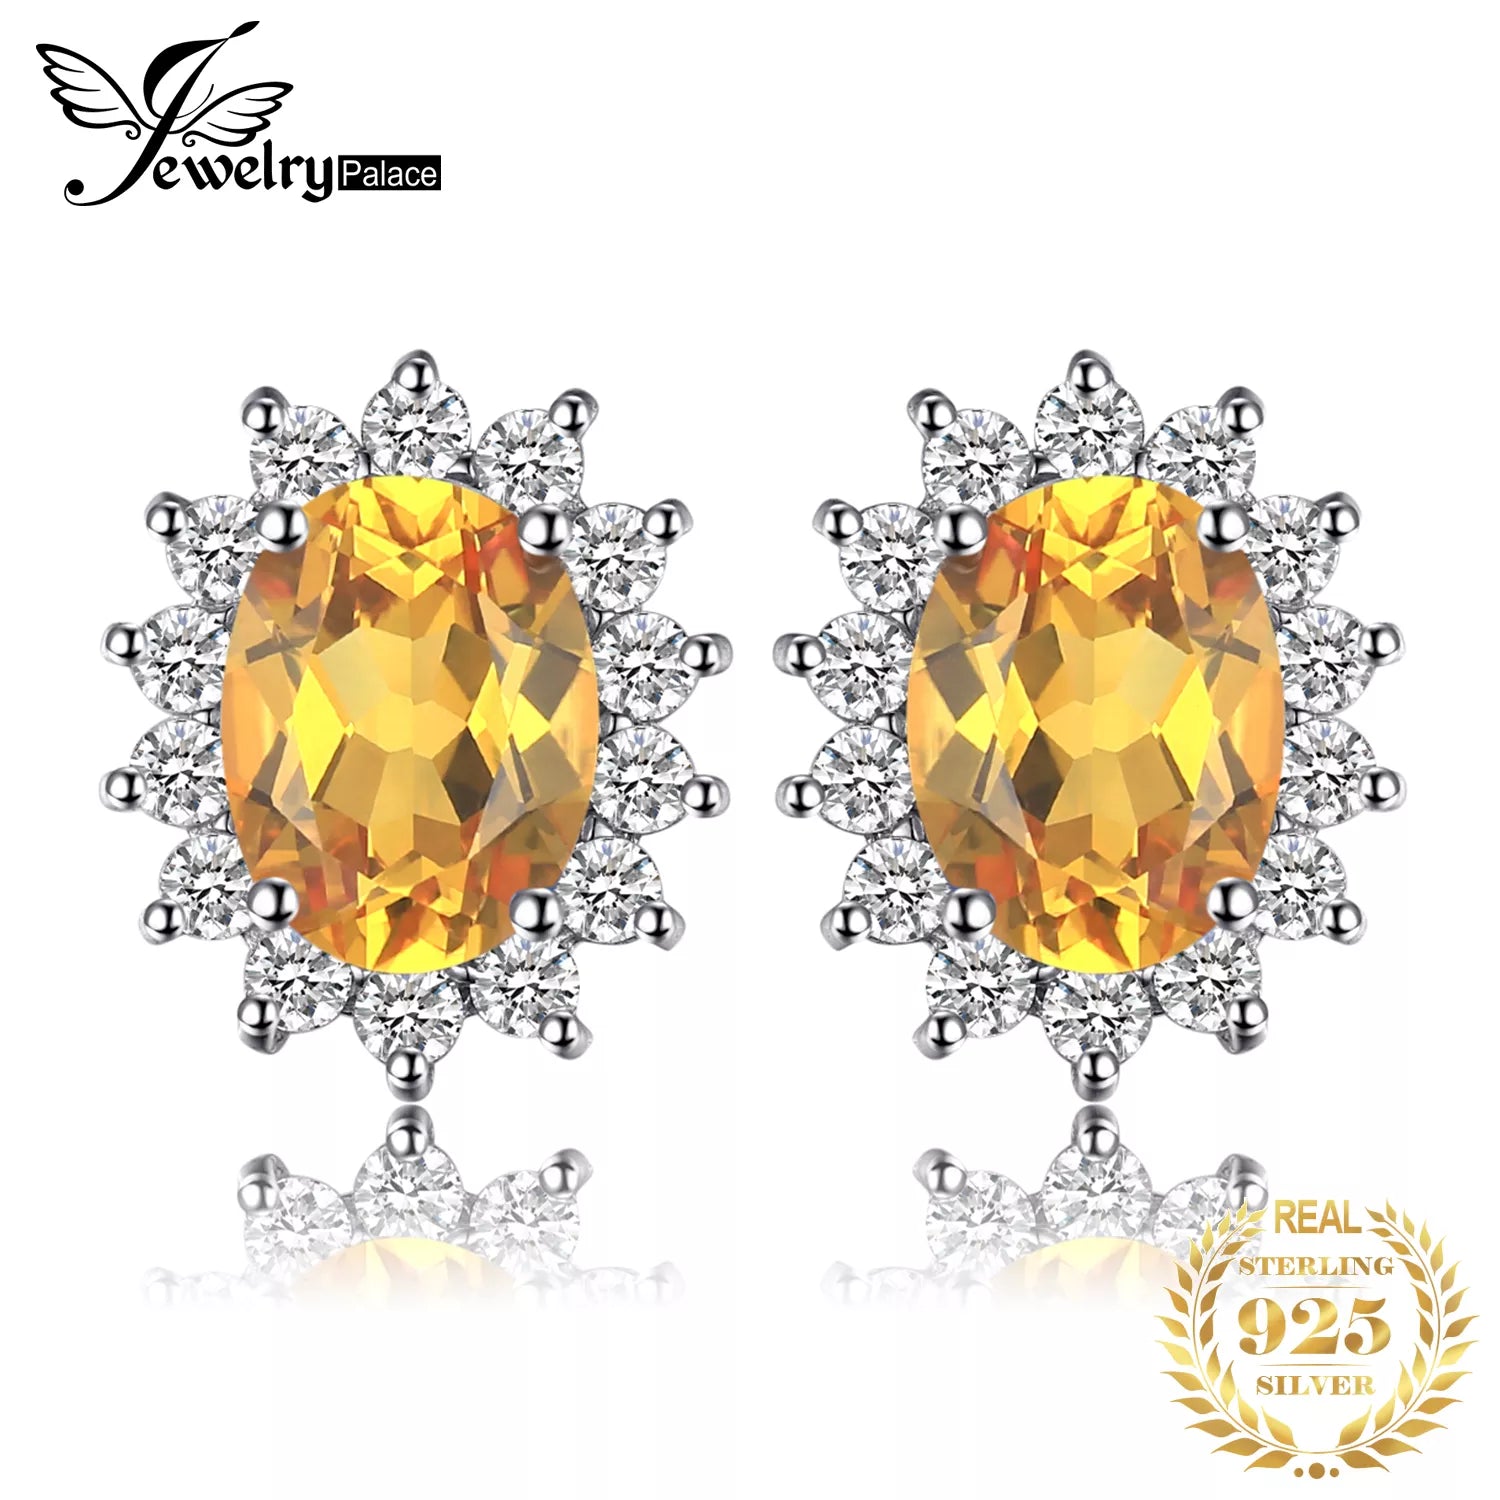 JewelryPalace Diana 1.2ct Natural Citrine 925 Sterling Silver Halo Earrings for Woman Wedding Engagement Jewelry Fashion Gift Default Title